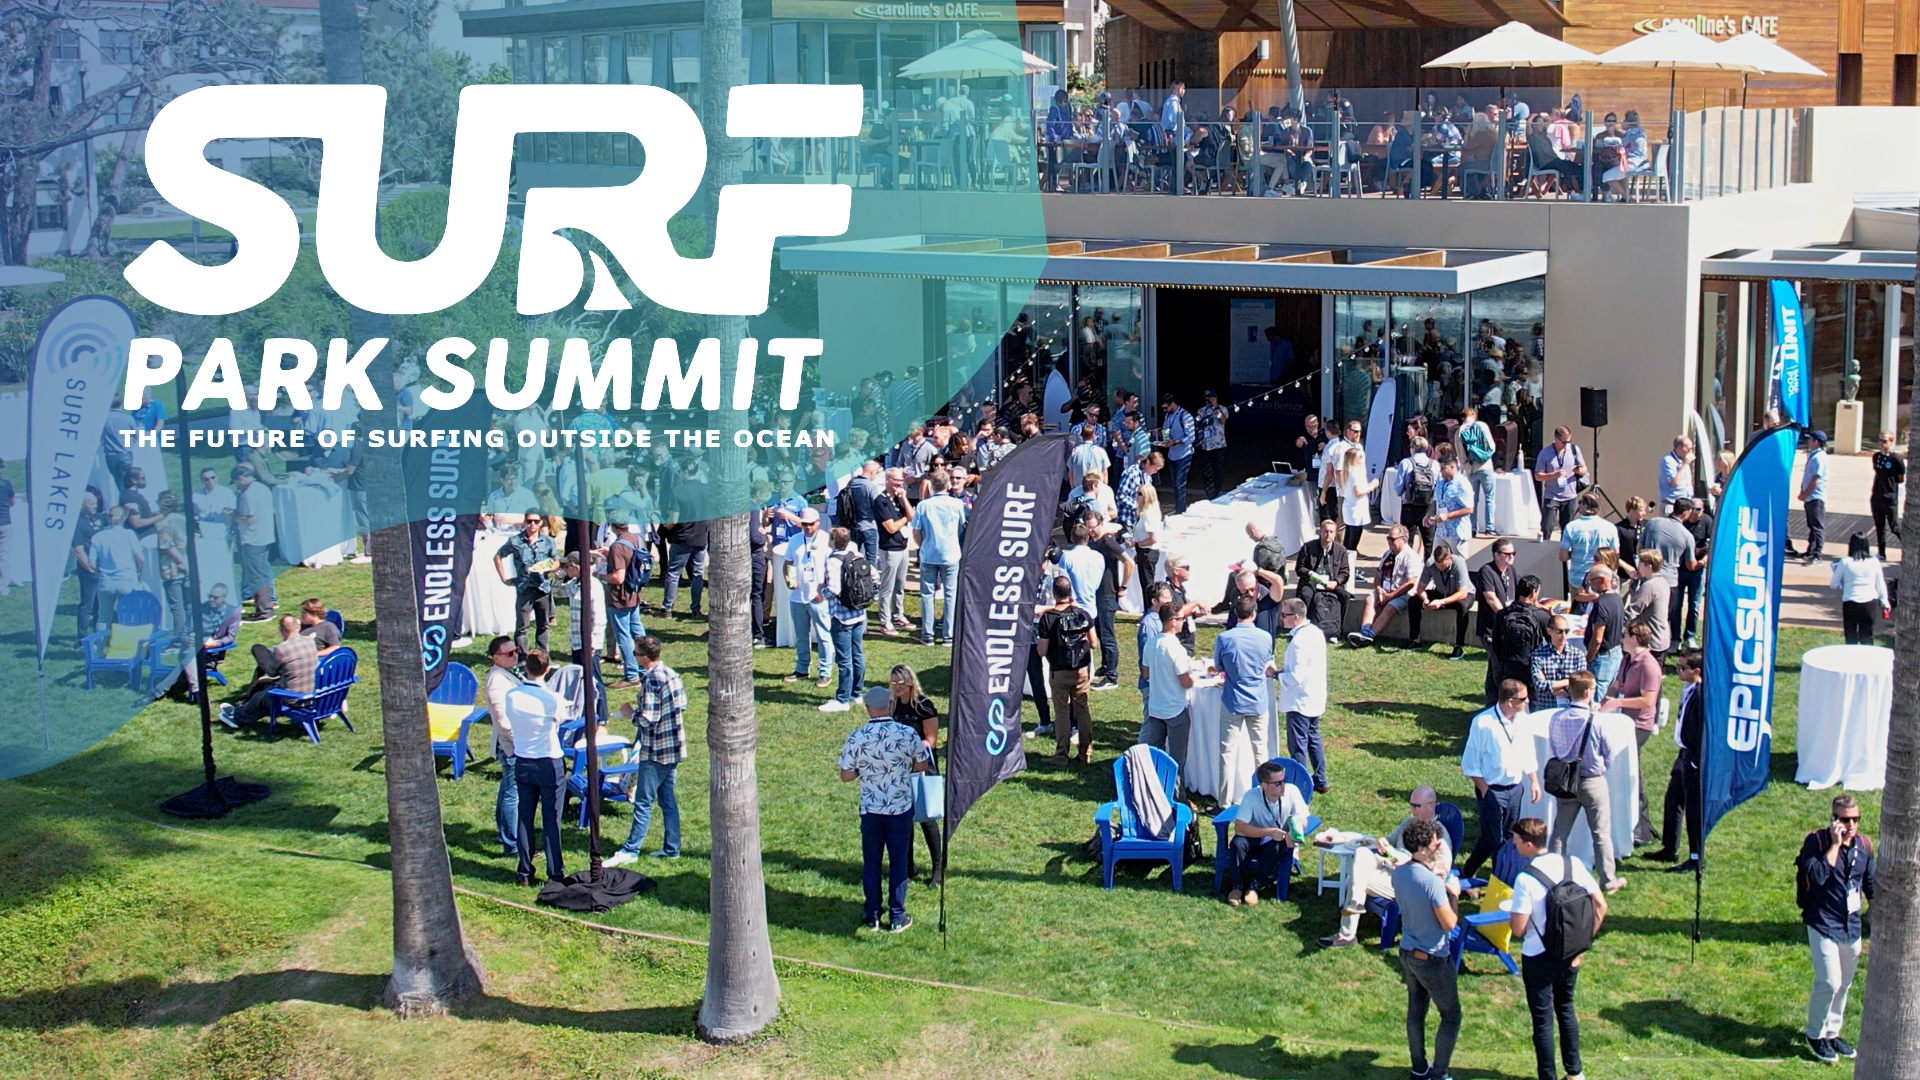 The 10th Annual Surf Park Summit is Next Week